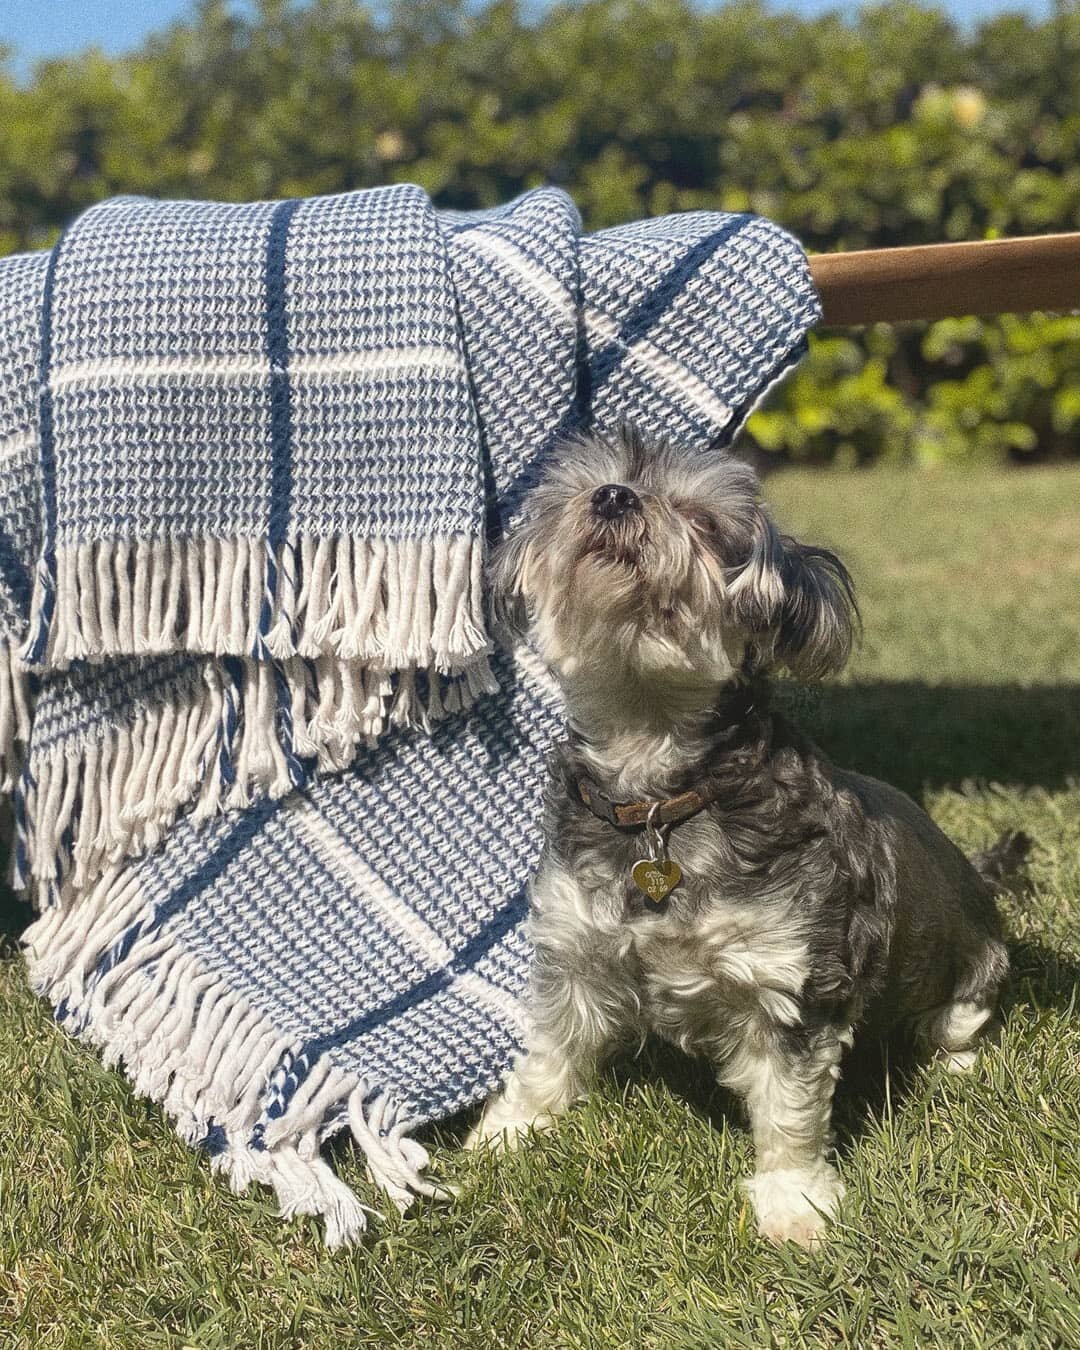 Chin down, mouth closed, ears relaxed, now put your chin up = That&rsquo;s your model face.
.
.
.
.
.
.
.
.
.
.
.
.
.
.
.
.
.
.
#hometextile #blanket #waffleblanket #homedecor #interiordesign #navyblanket #blueblanket #blanketseason #modeldog #modelf